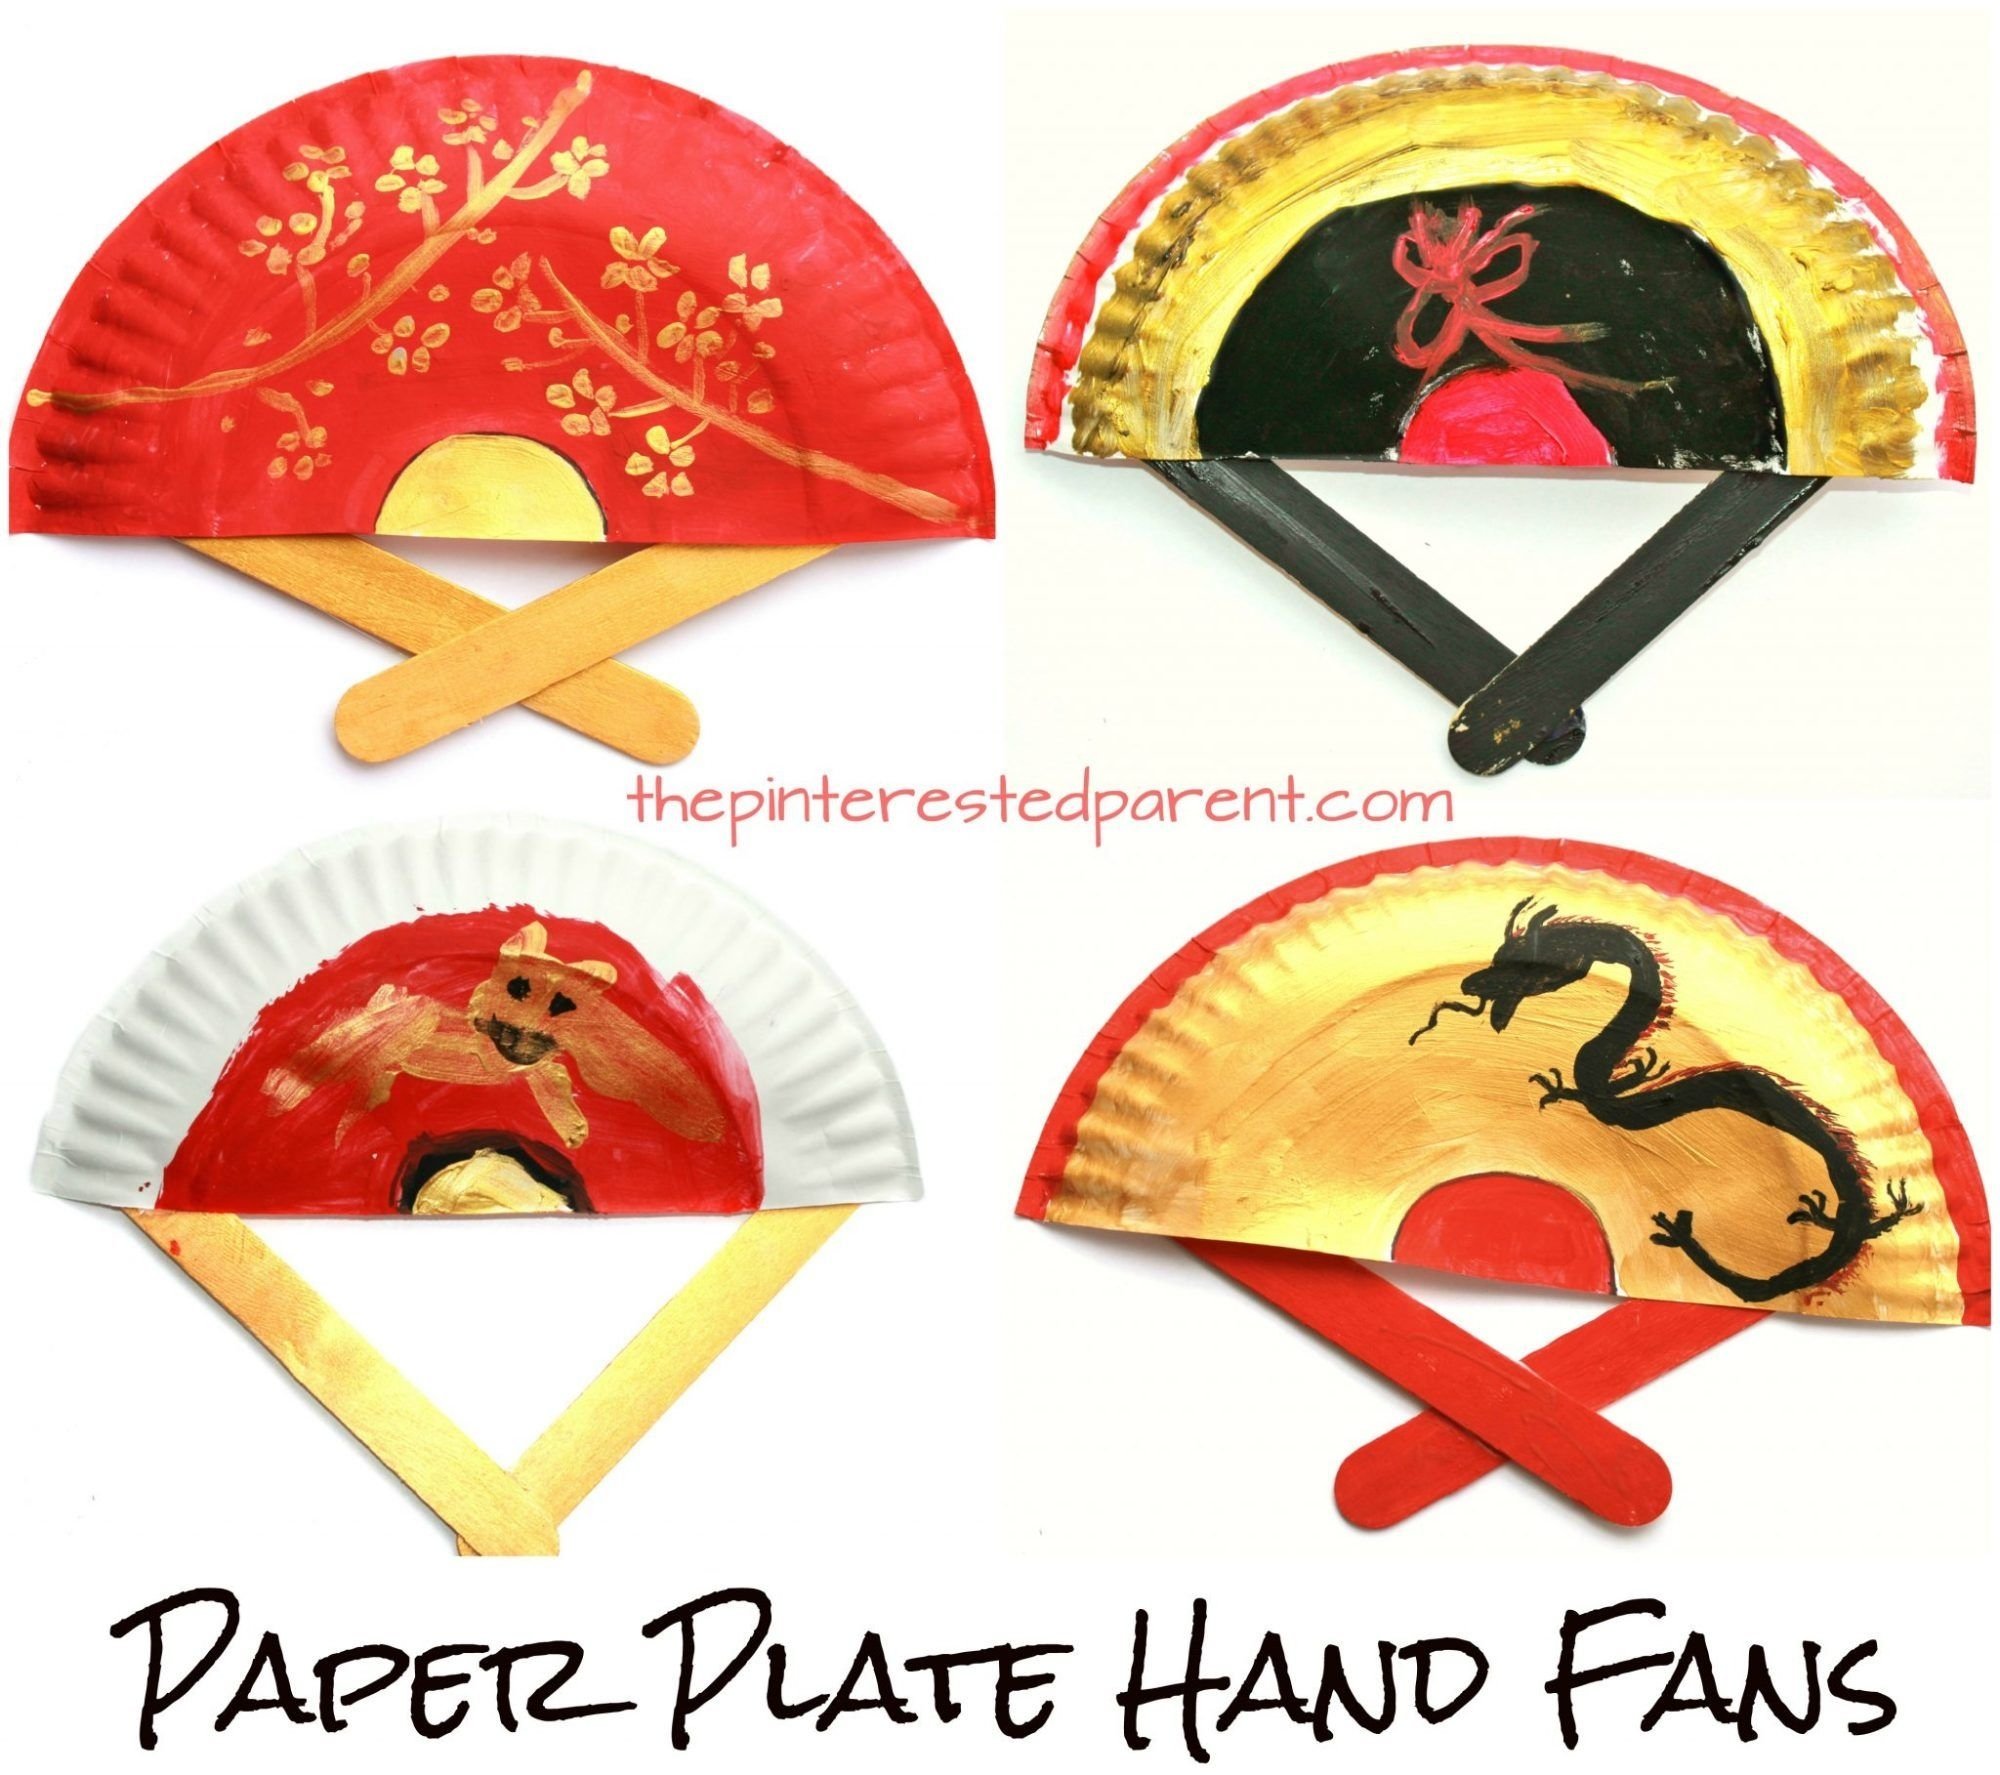 10 Most Recommended Chinese New Year Craft Ideas paper plate hand fans hand fans project ideas and kids s 2022